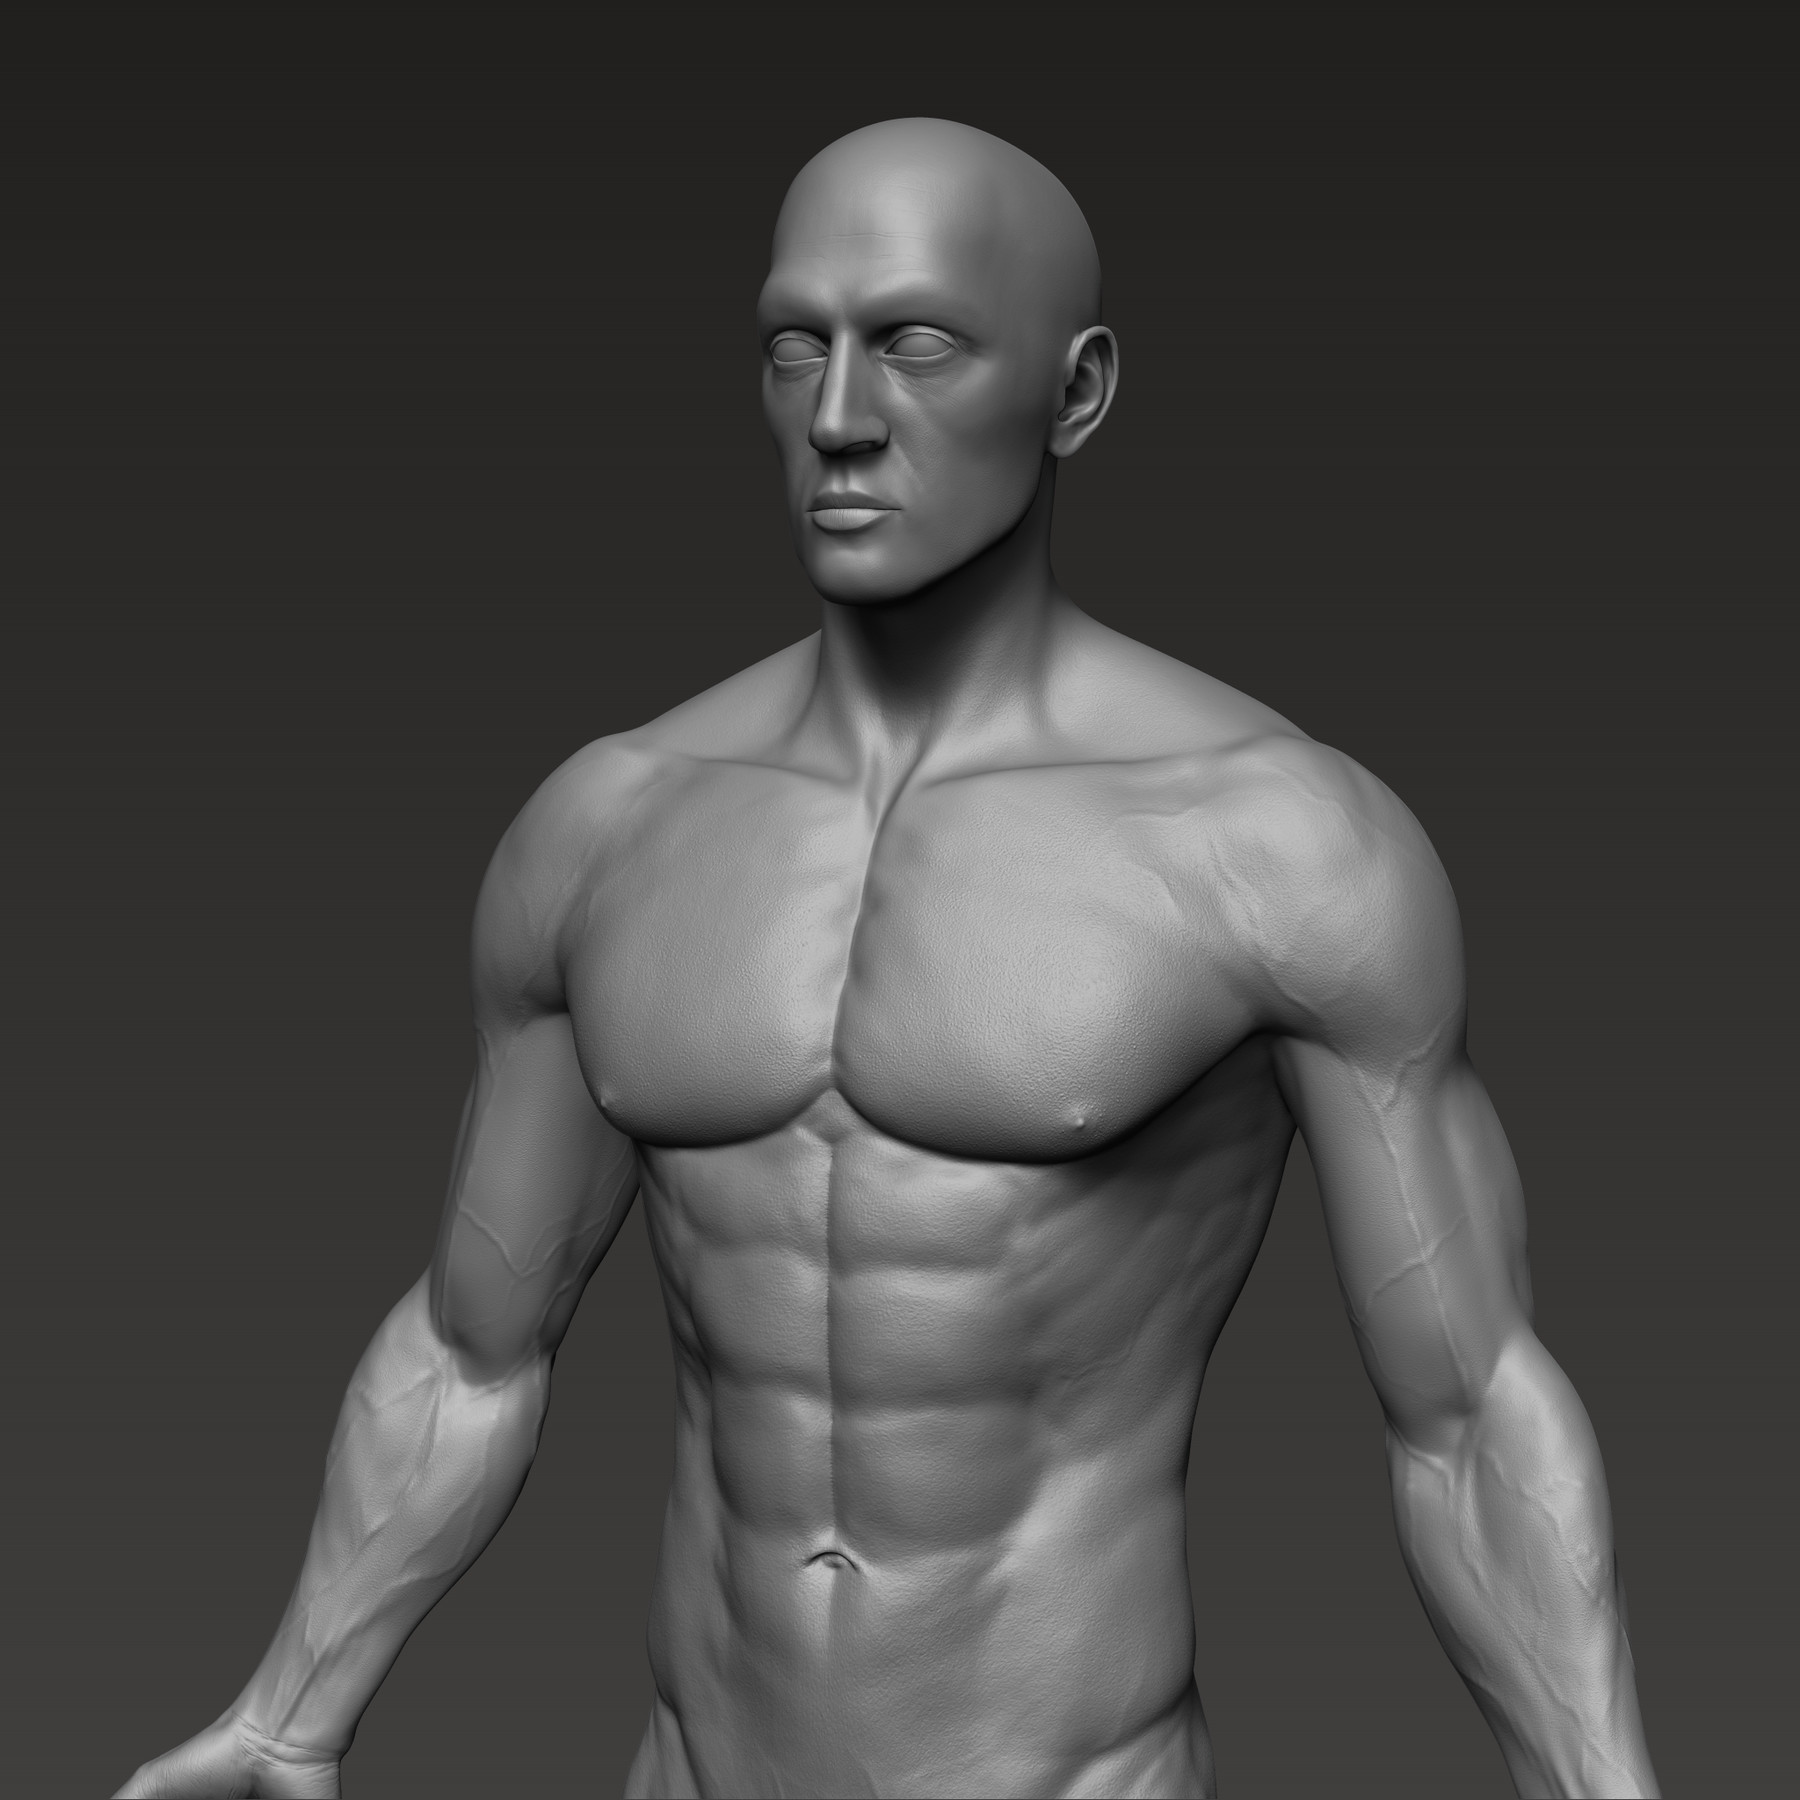 Muscles Of The Torso Model Full Body Muscle Anatomy 3d Model Images